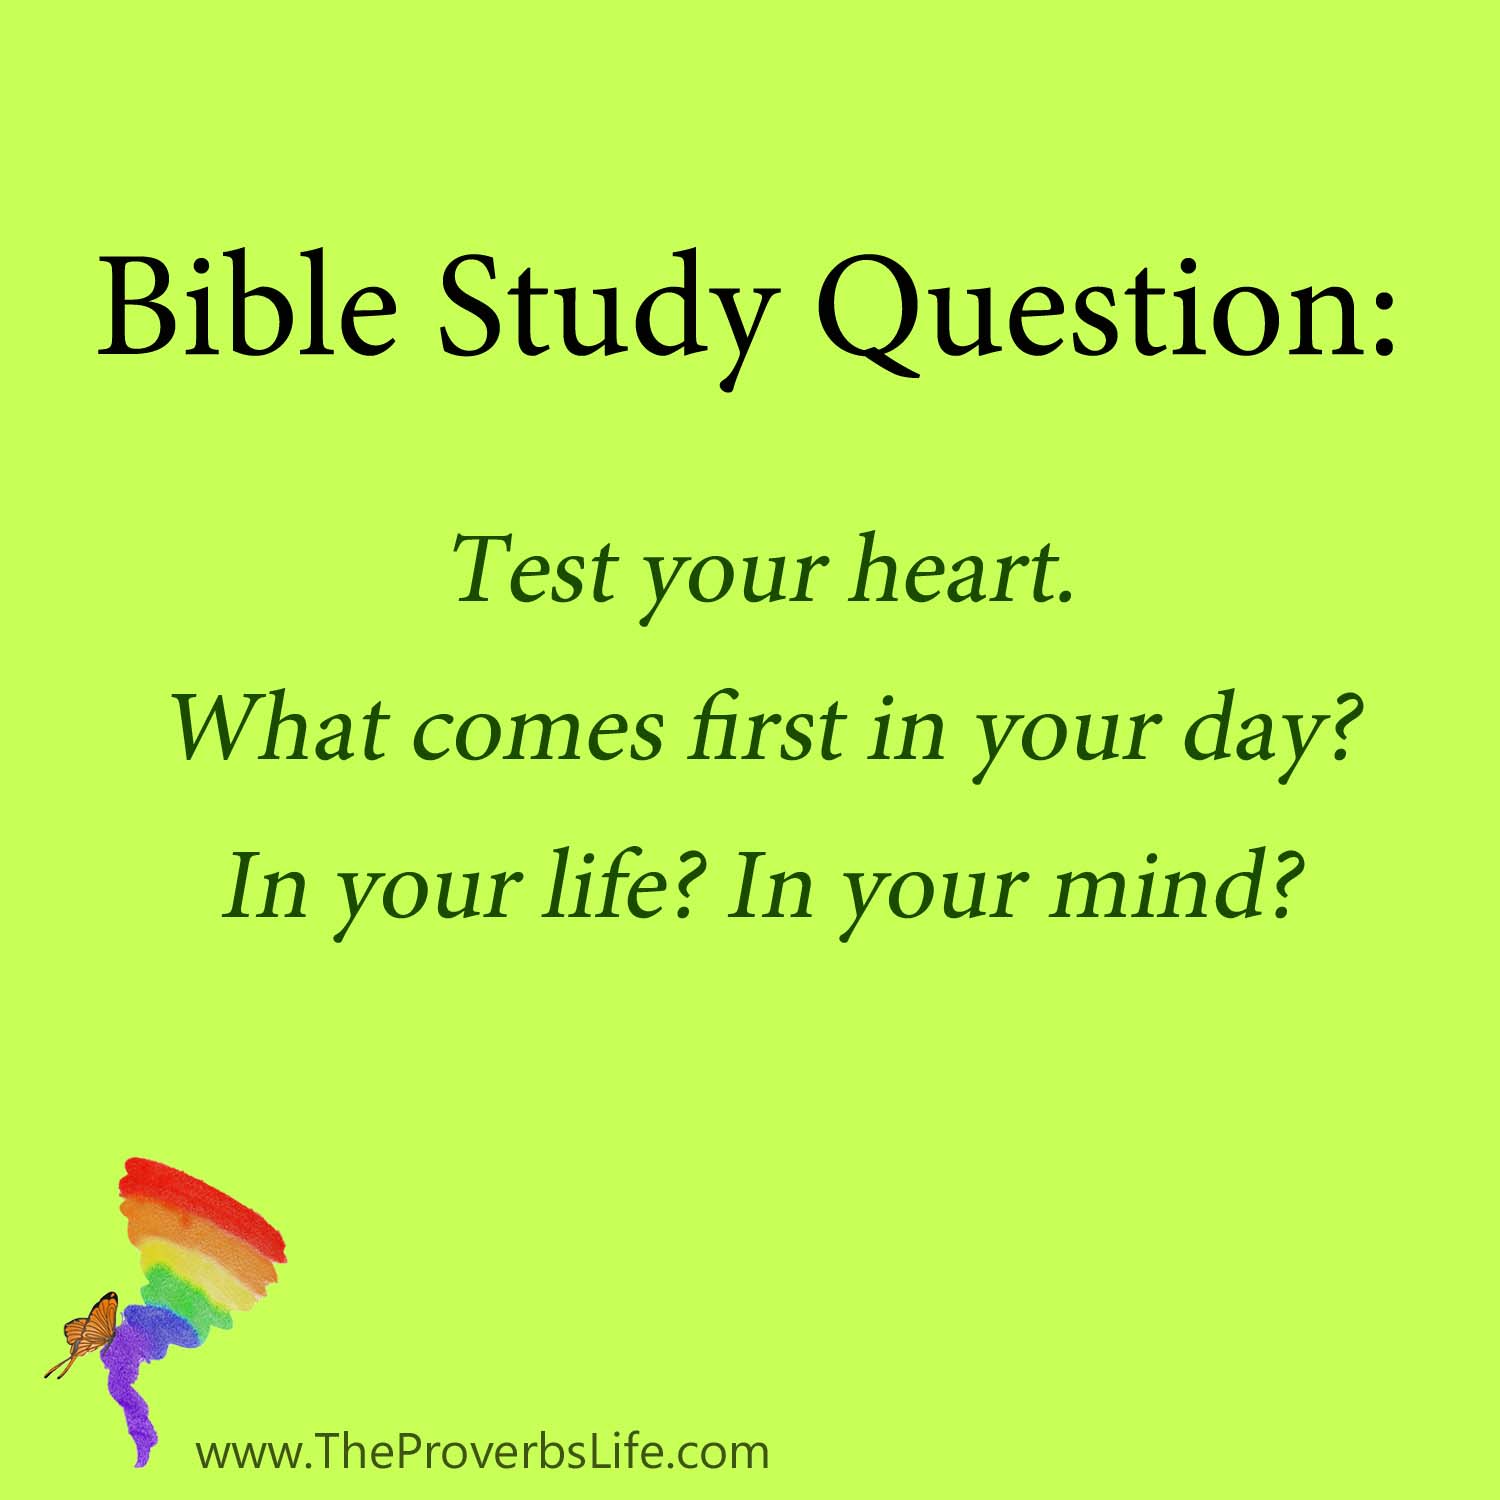 Bible Study Question - test your heart